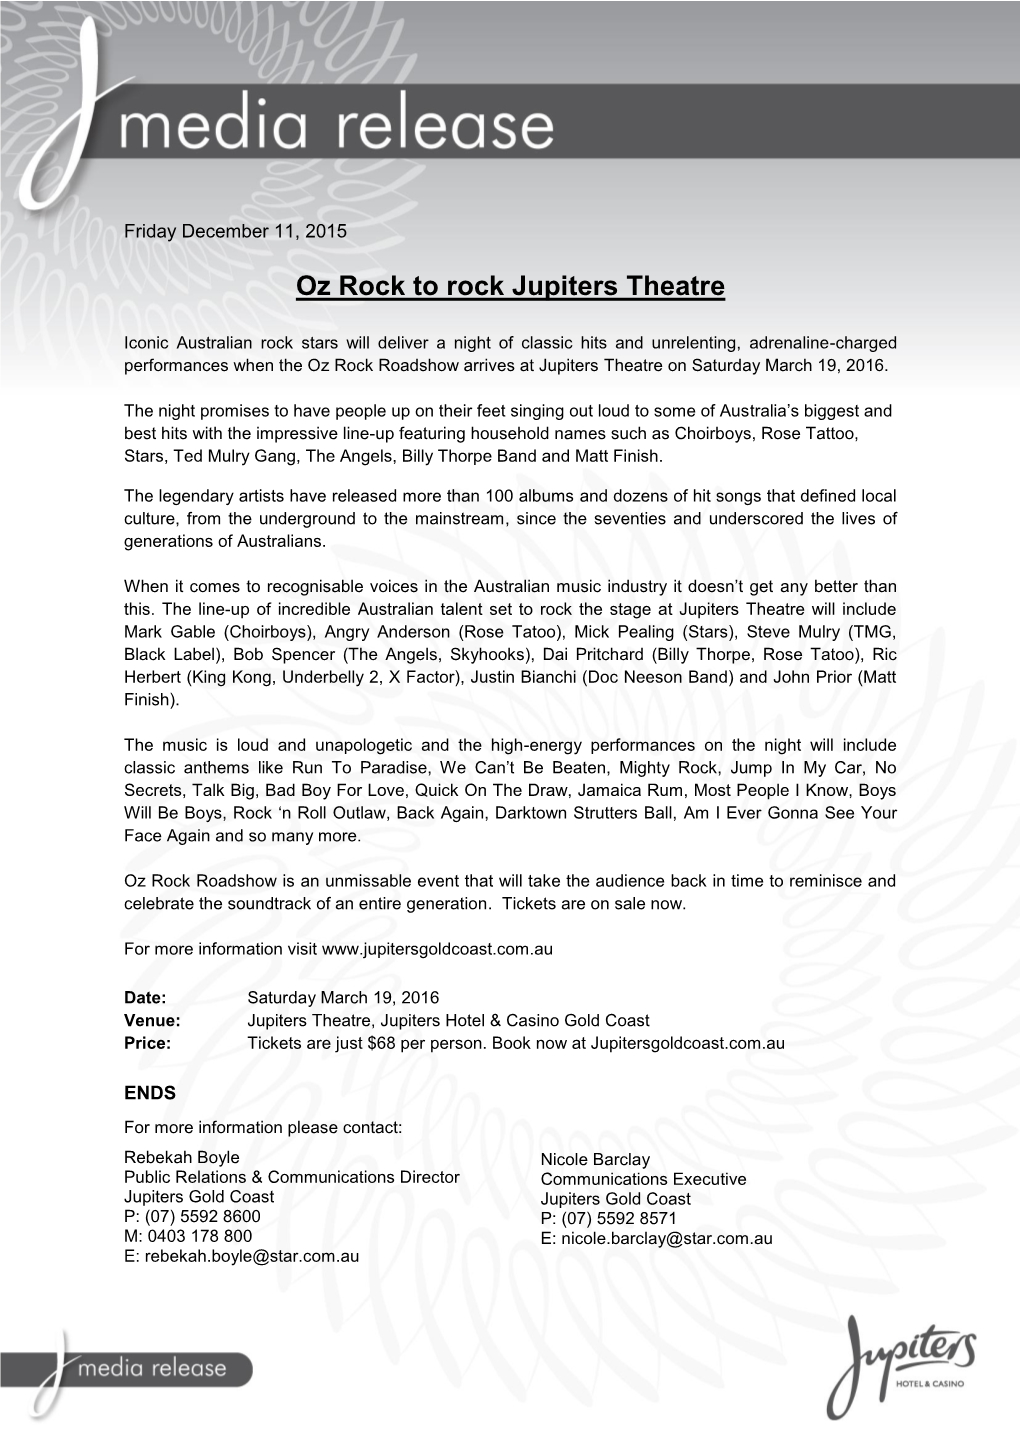 The Oz Rock Roadshow Arrives at Jupiters Theatre on Saturday March 19, 2016